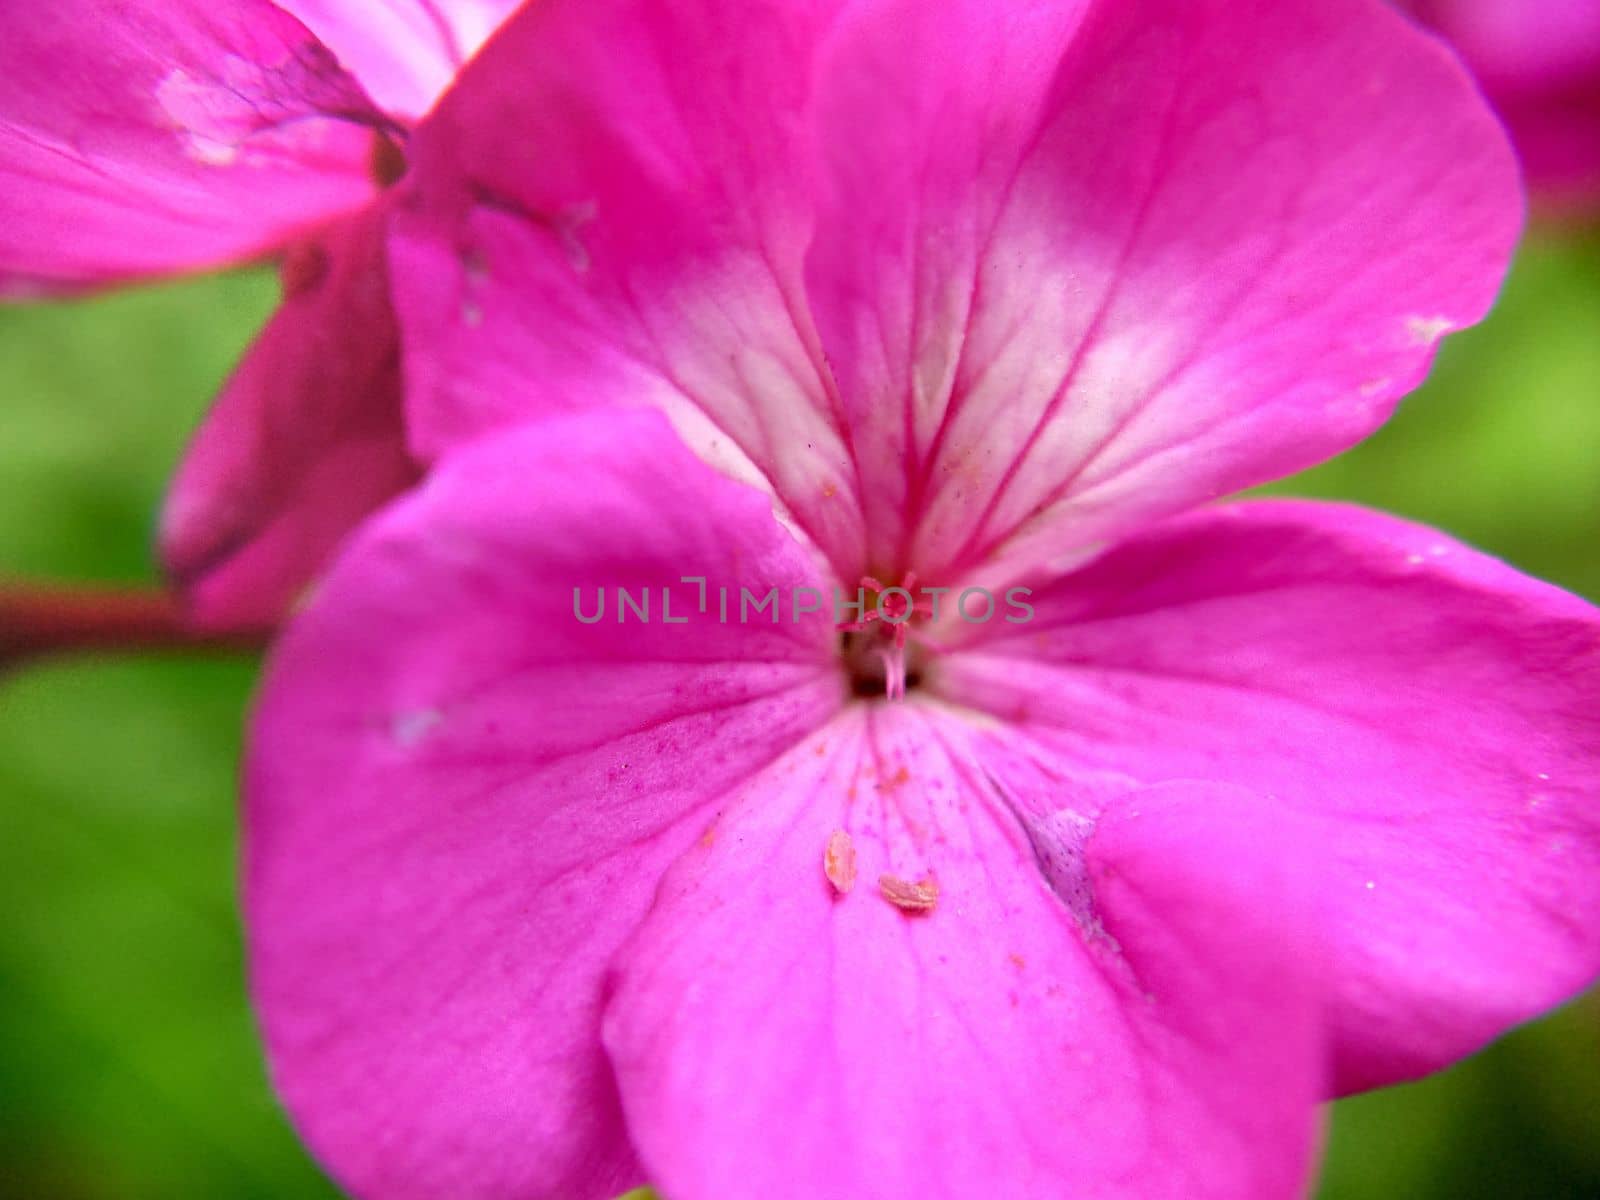 Pink-white flower with streaks on the leaves on a blurry background by Mastak80